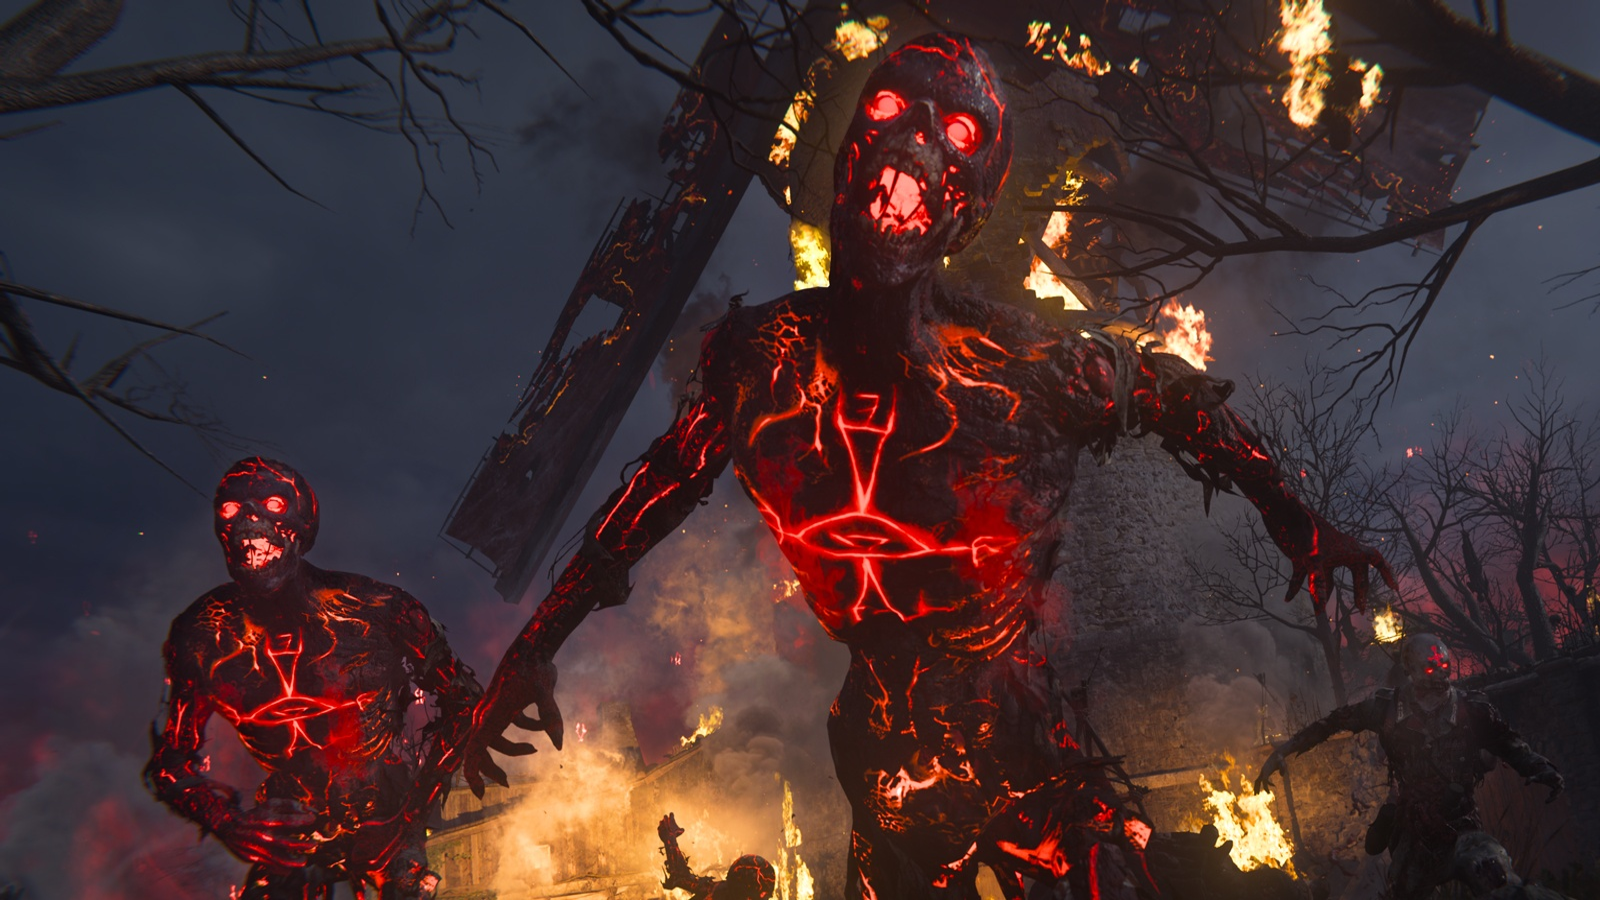 Call Of Duty: Vanguard's Zombie mode shows new supernatural powers